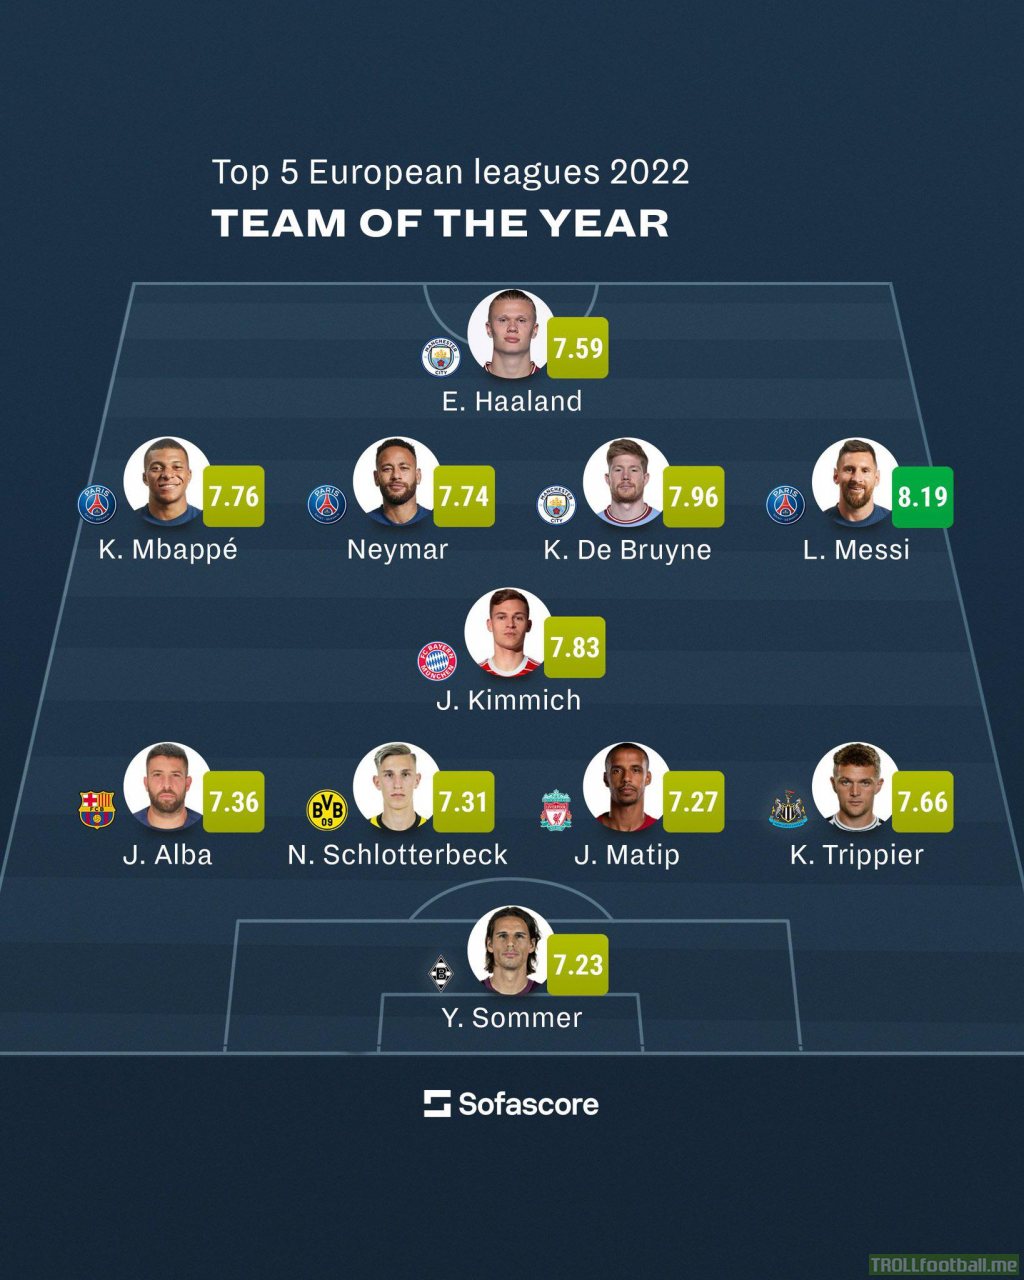 Sofascore highest-rated XI from the top 5 European leagues in 2022